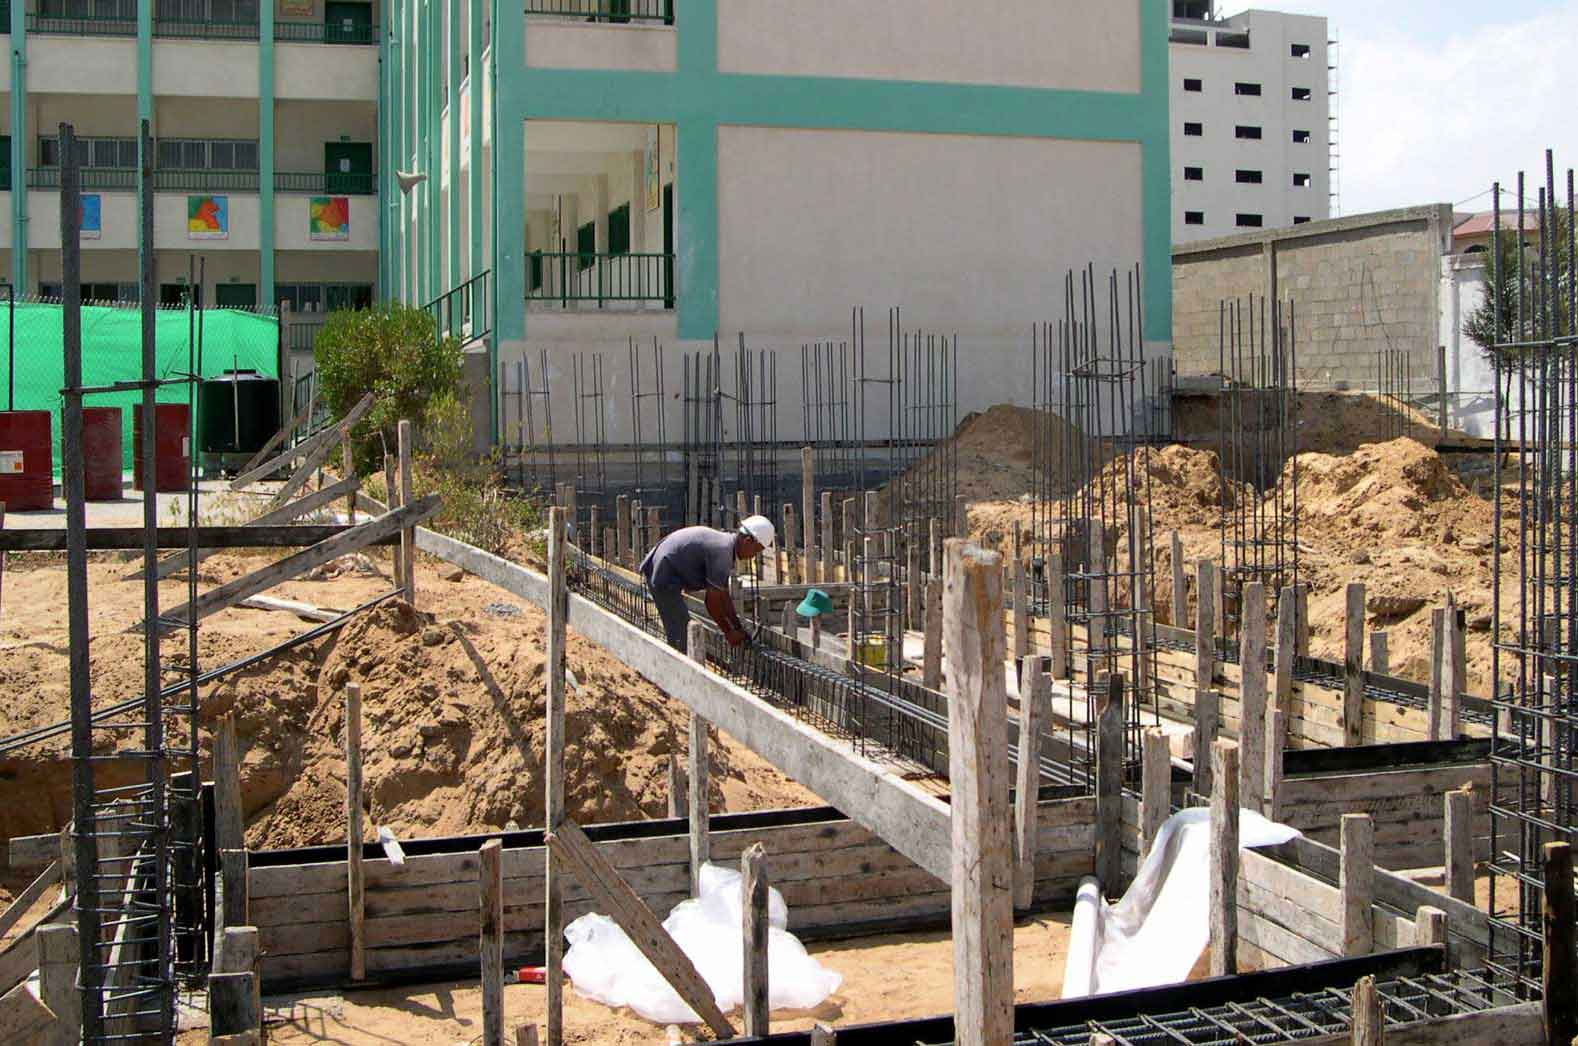 In 2005, with funding from USAID, Anera upgraded six schools in Gaza, including the Awni Al-Hertani School in Jabalia.